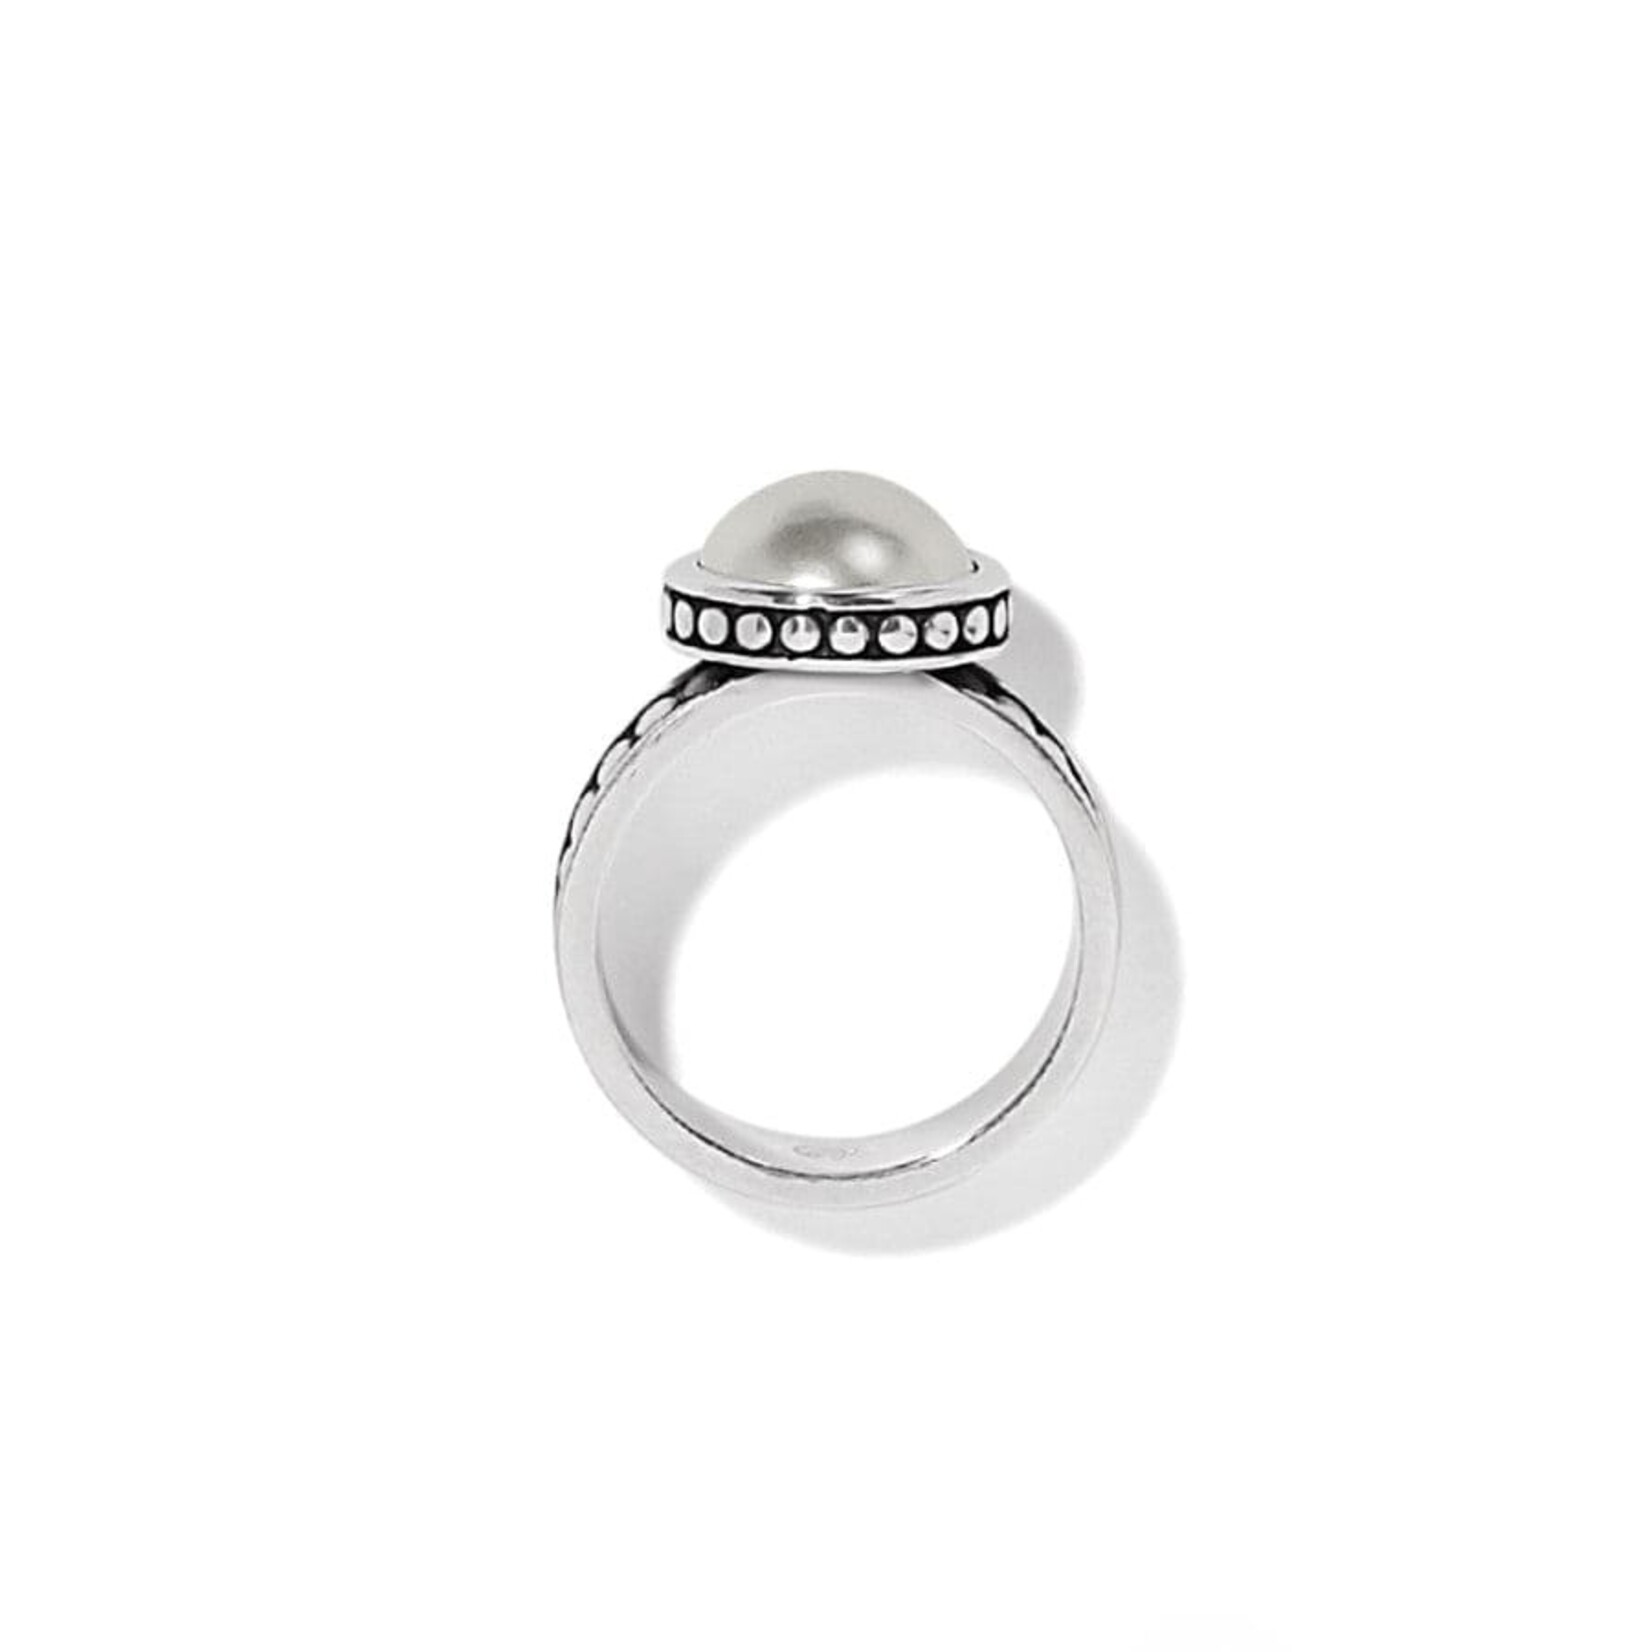 Brighton J63093 Pebble Dot Pearl Wide Band Ring - Size 6